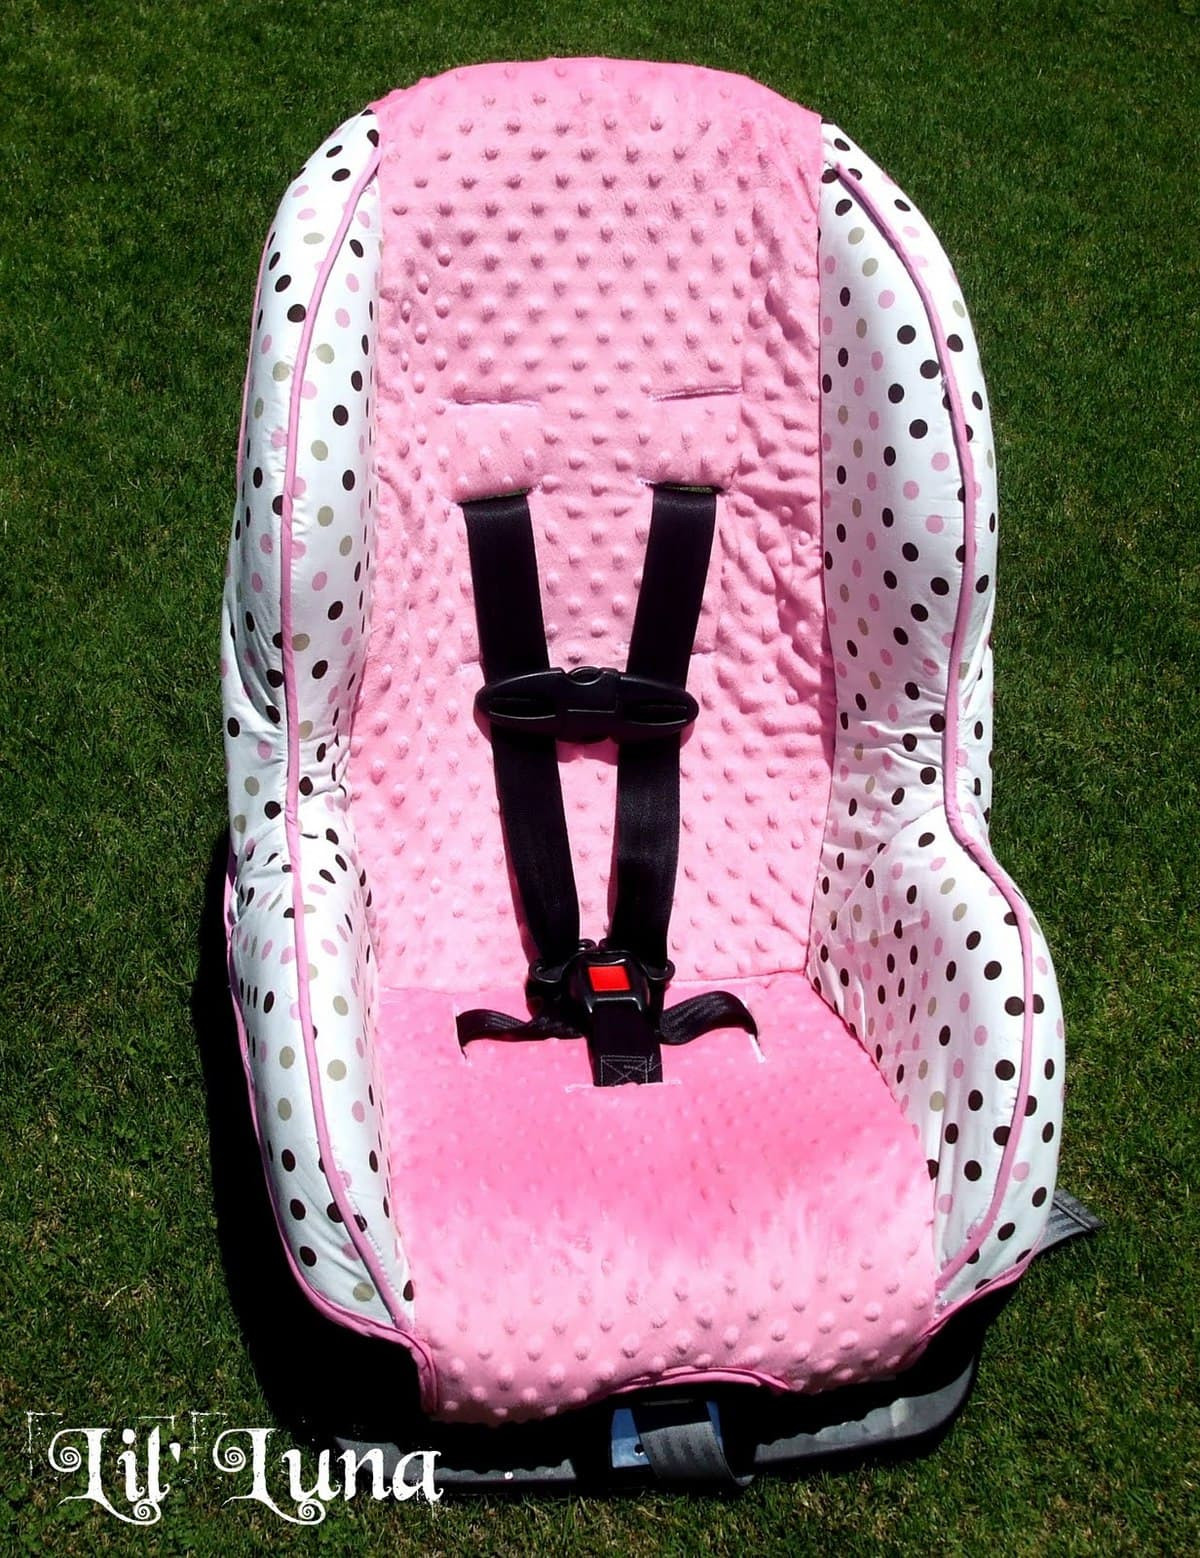 DIY Baby Car Seat Covers
 75 DIY Gifts For Kids